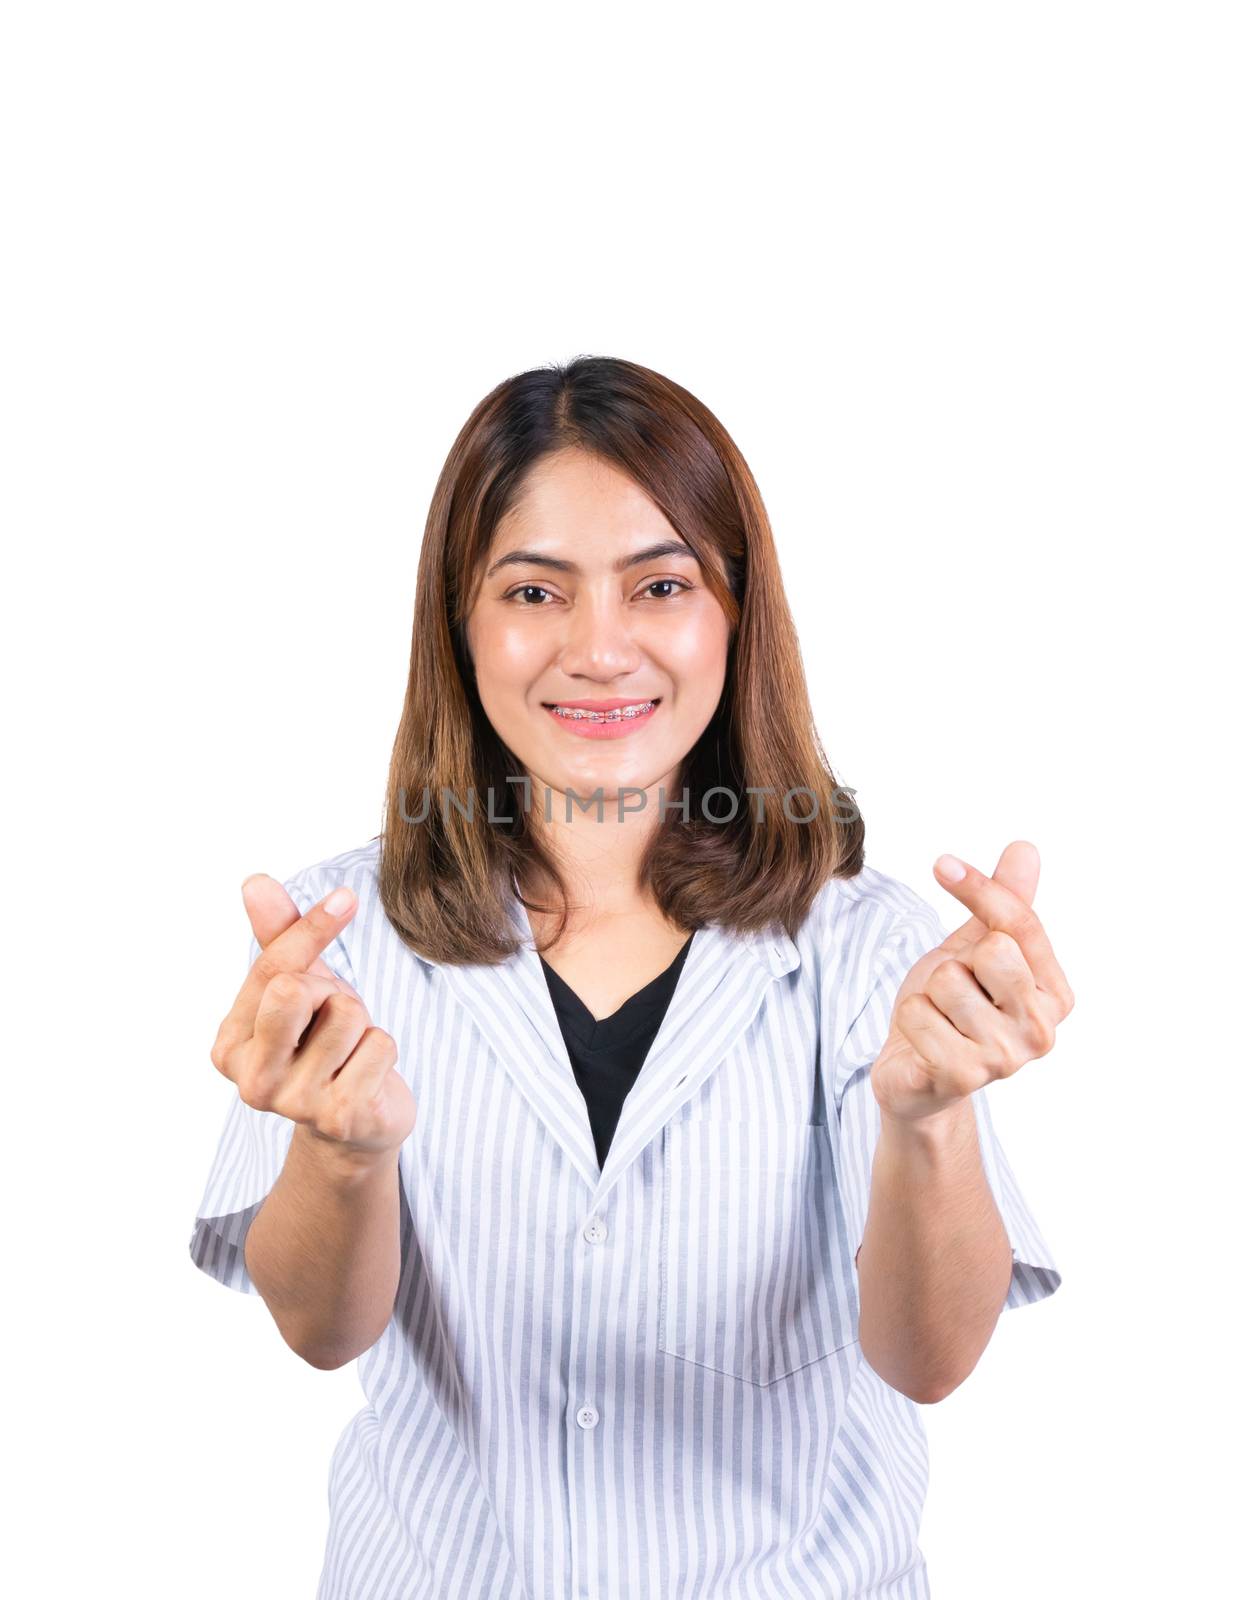 woman dental braces smile showing mini heart sign on white background